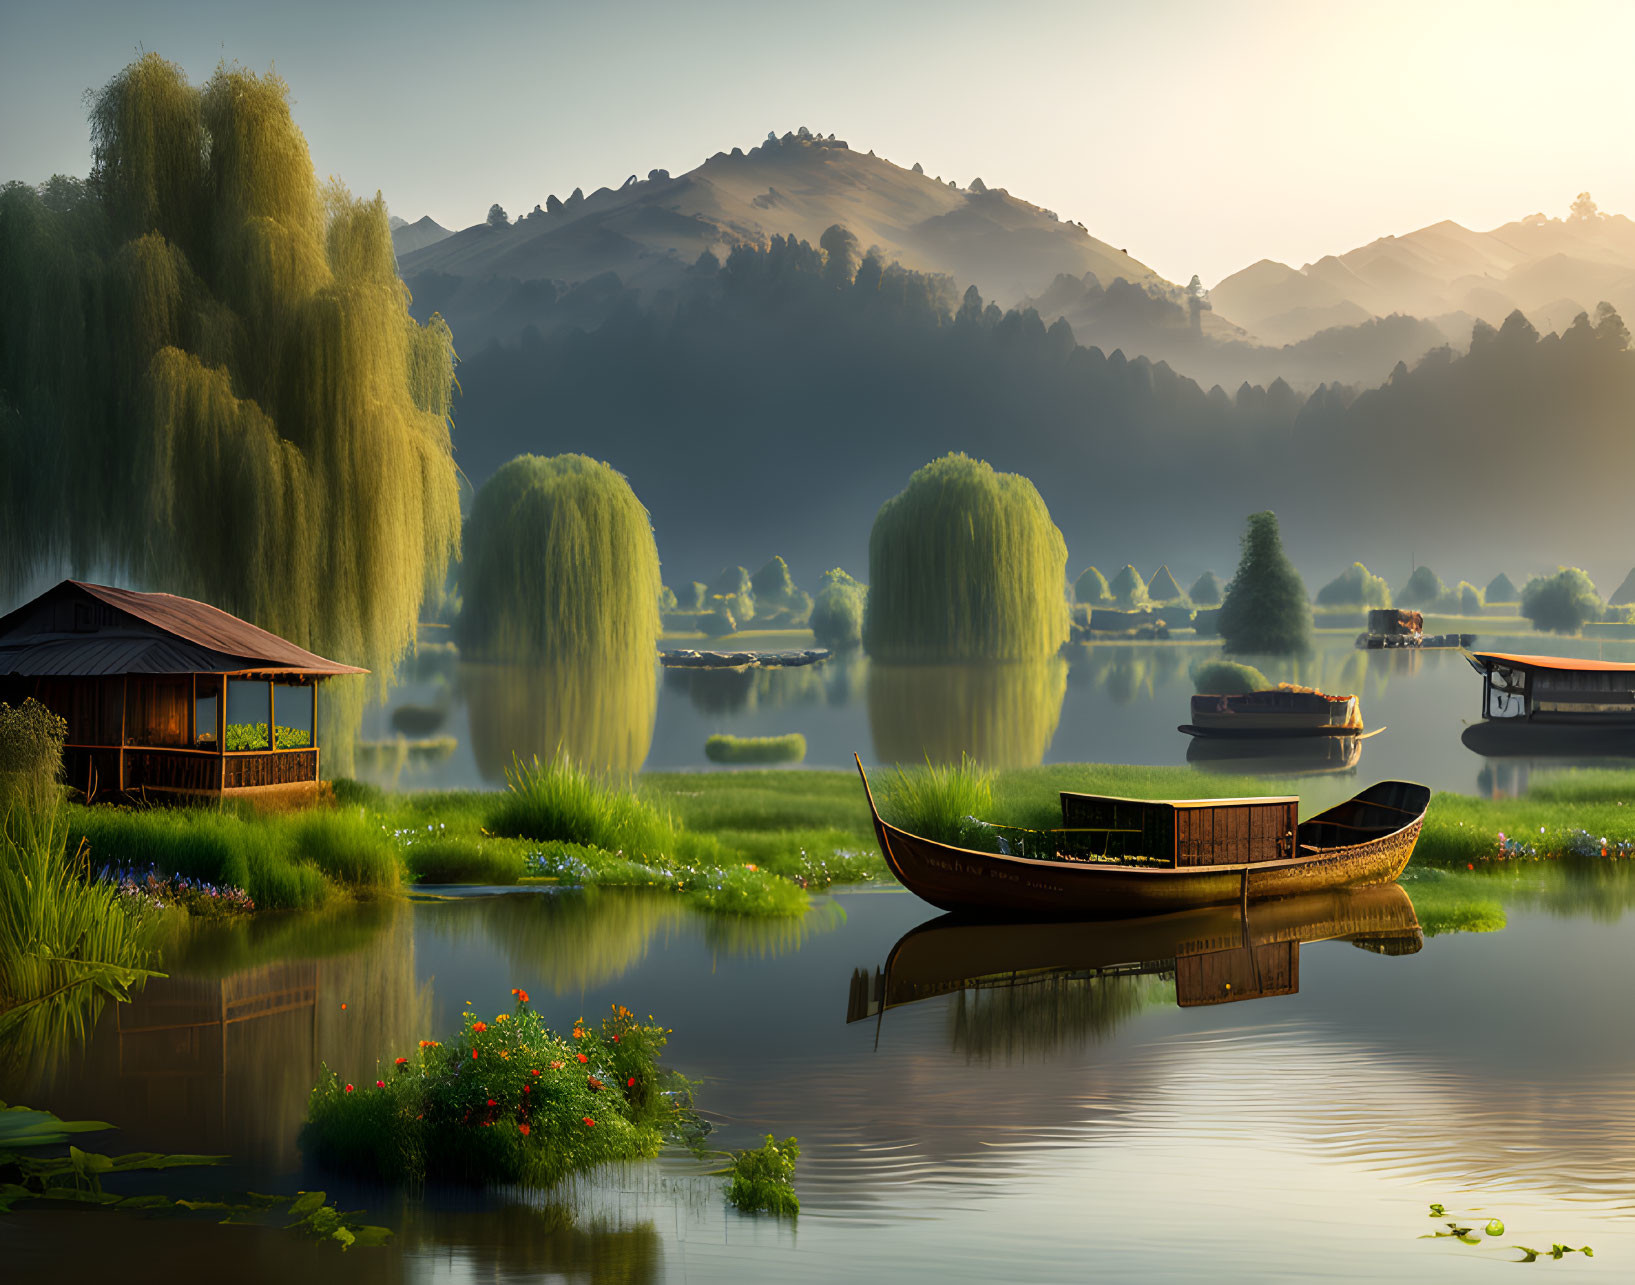 Tranquil lake scene with boat, stilt houses, greenery, misty hills at dawn